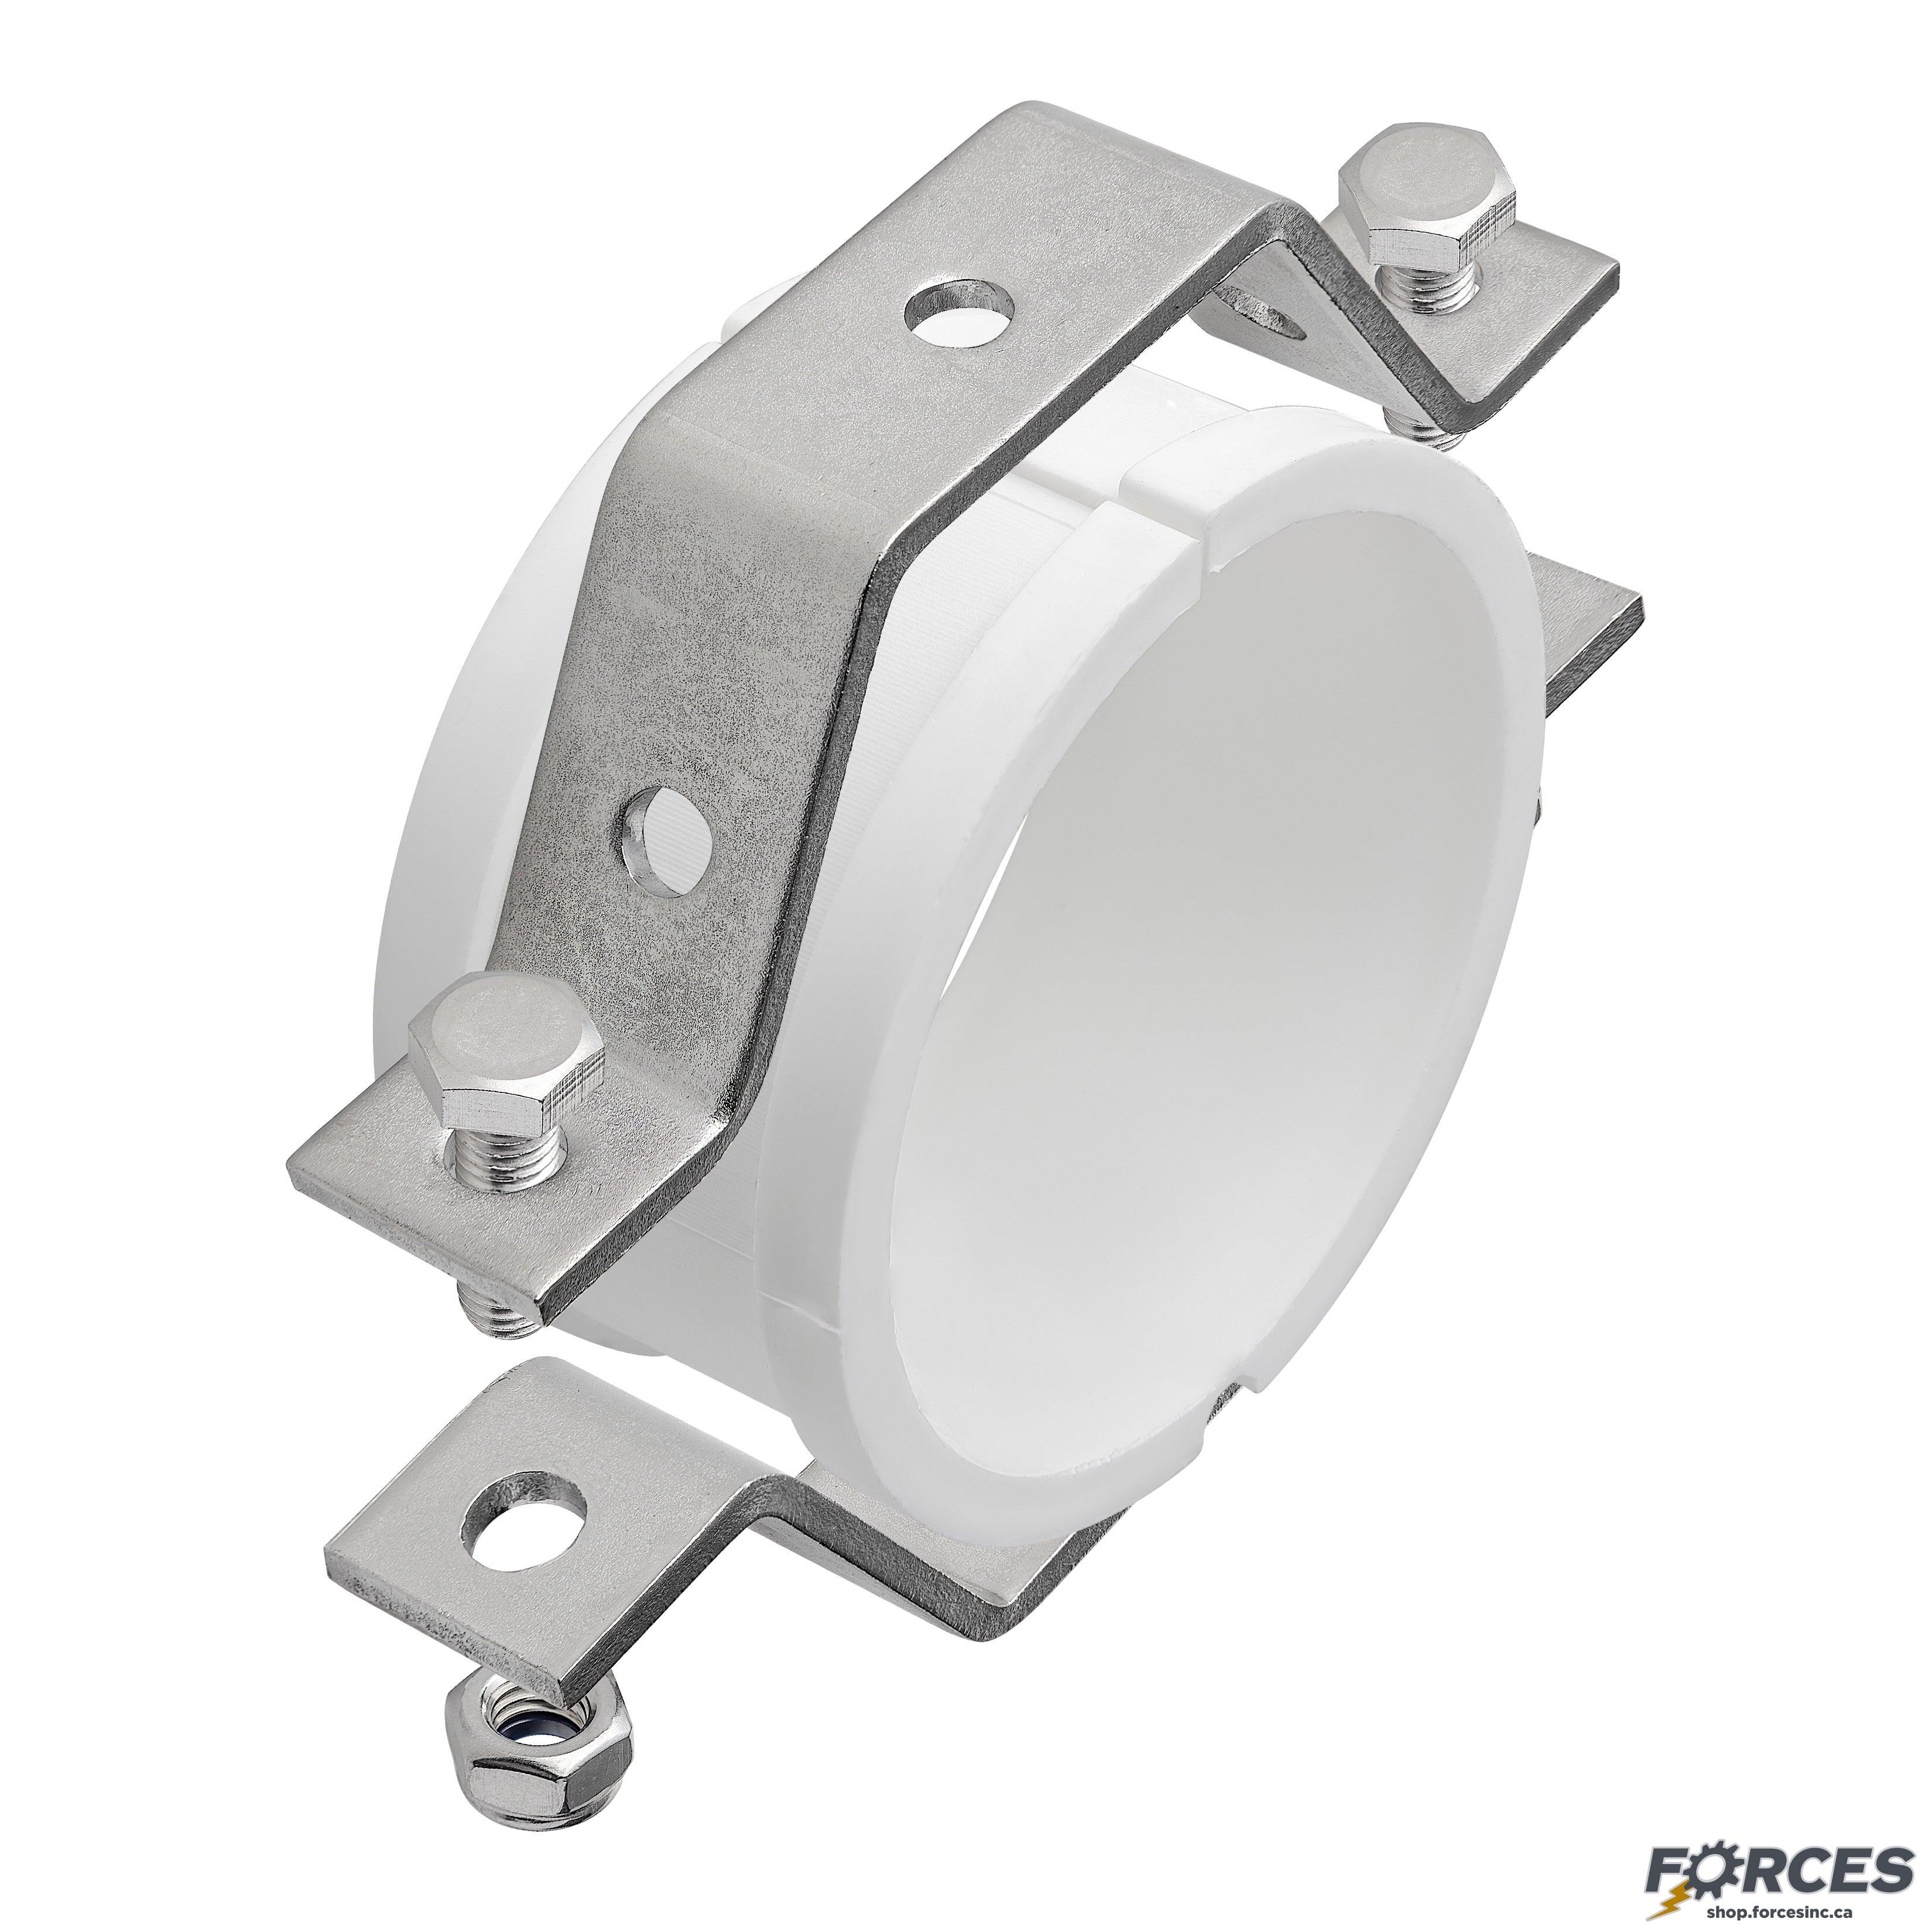 3" Hanger for Sanitary Tube With PVC Insert 304 Stainless Steel - Forces Inc